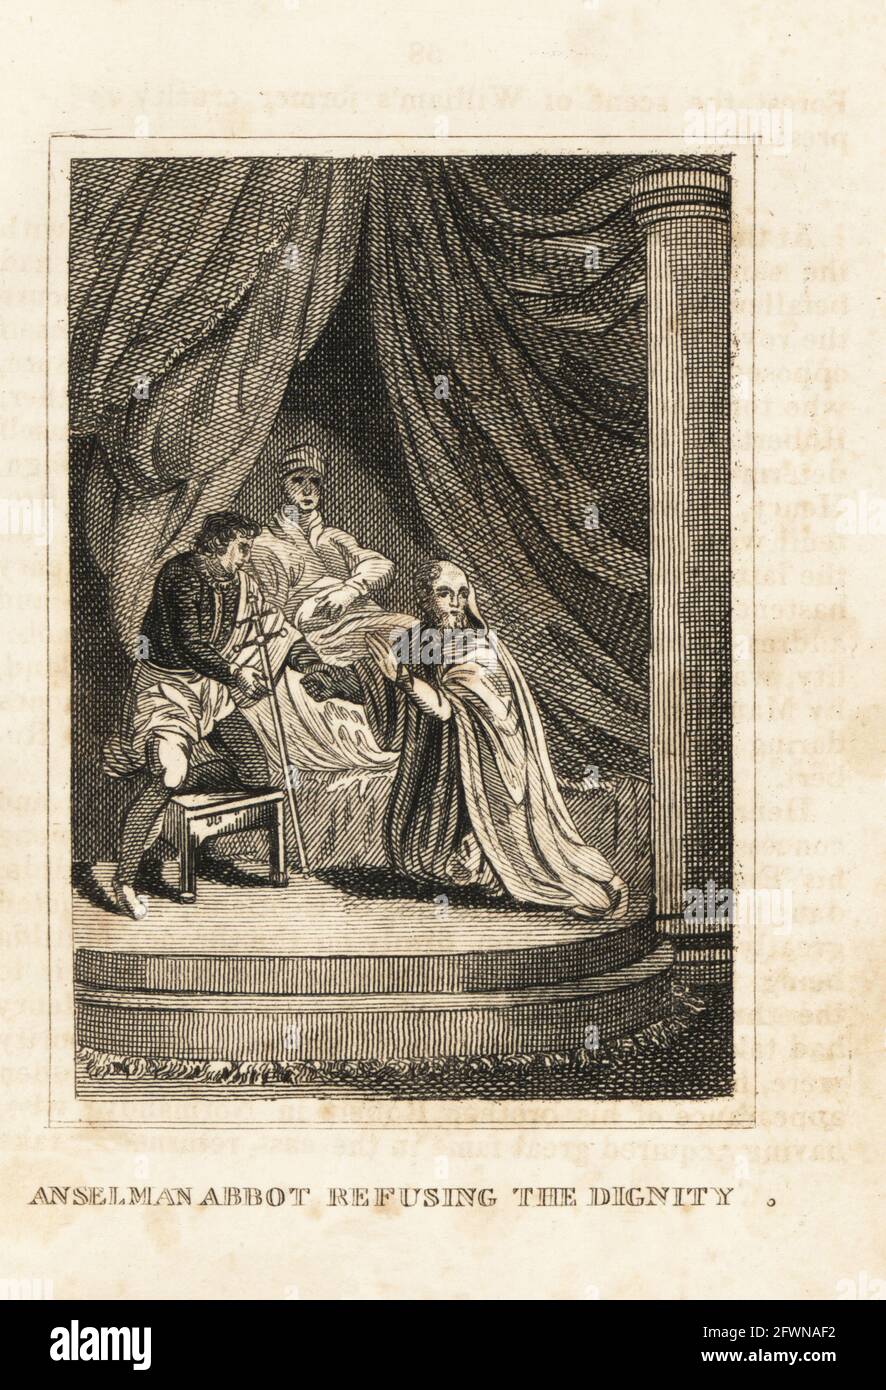 Anselm, Archbishop of Canterbury, exiled by the English king, 12th century. Anselman Abbot refusing the dignity. Copperplate engraving from M. A. Jones’ History of England from Julius Caesar to George IV, G. Virtue, 26 Ivy Lane, London, 1836. Stock Photo